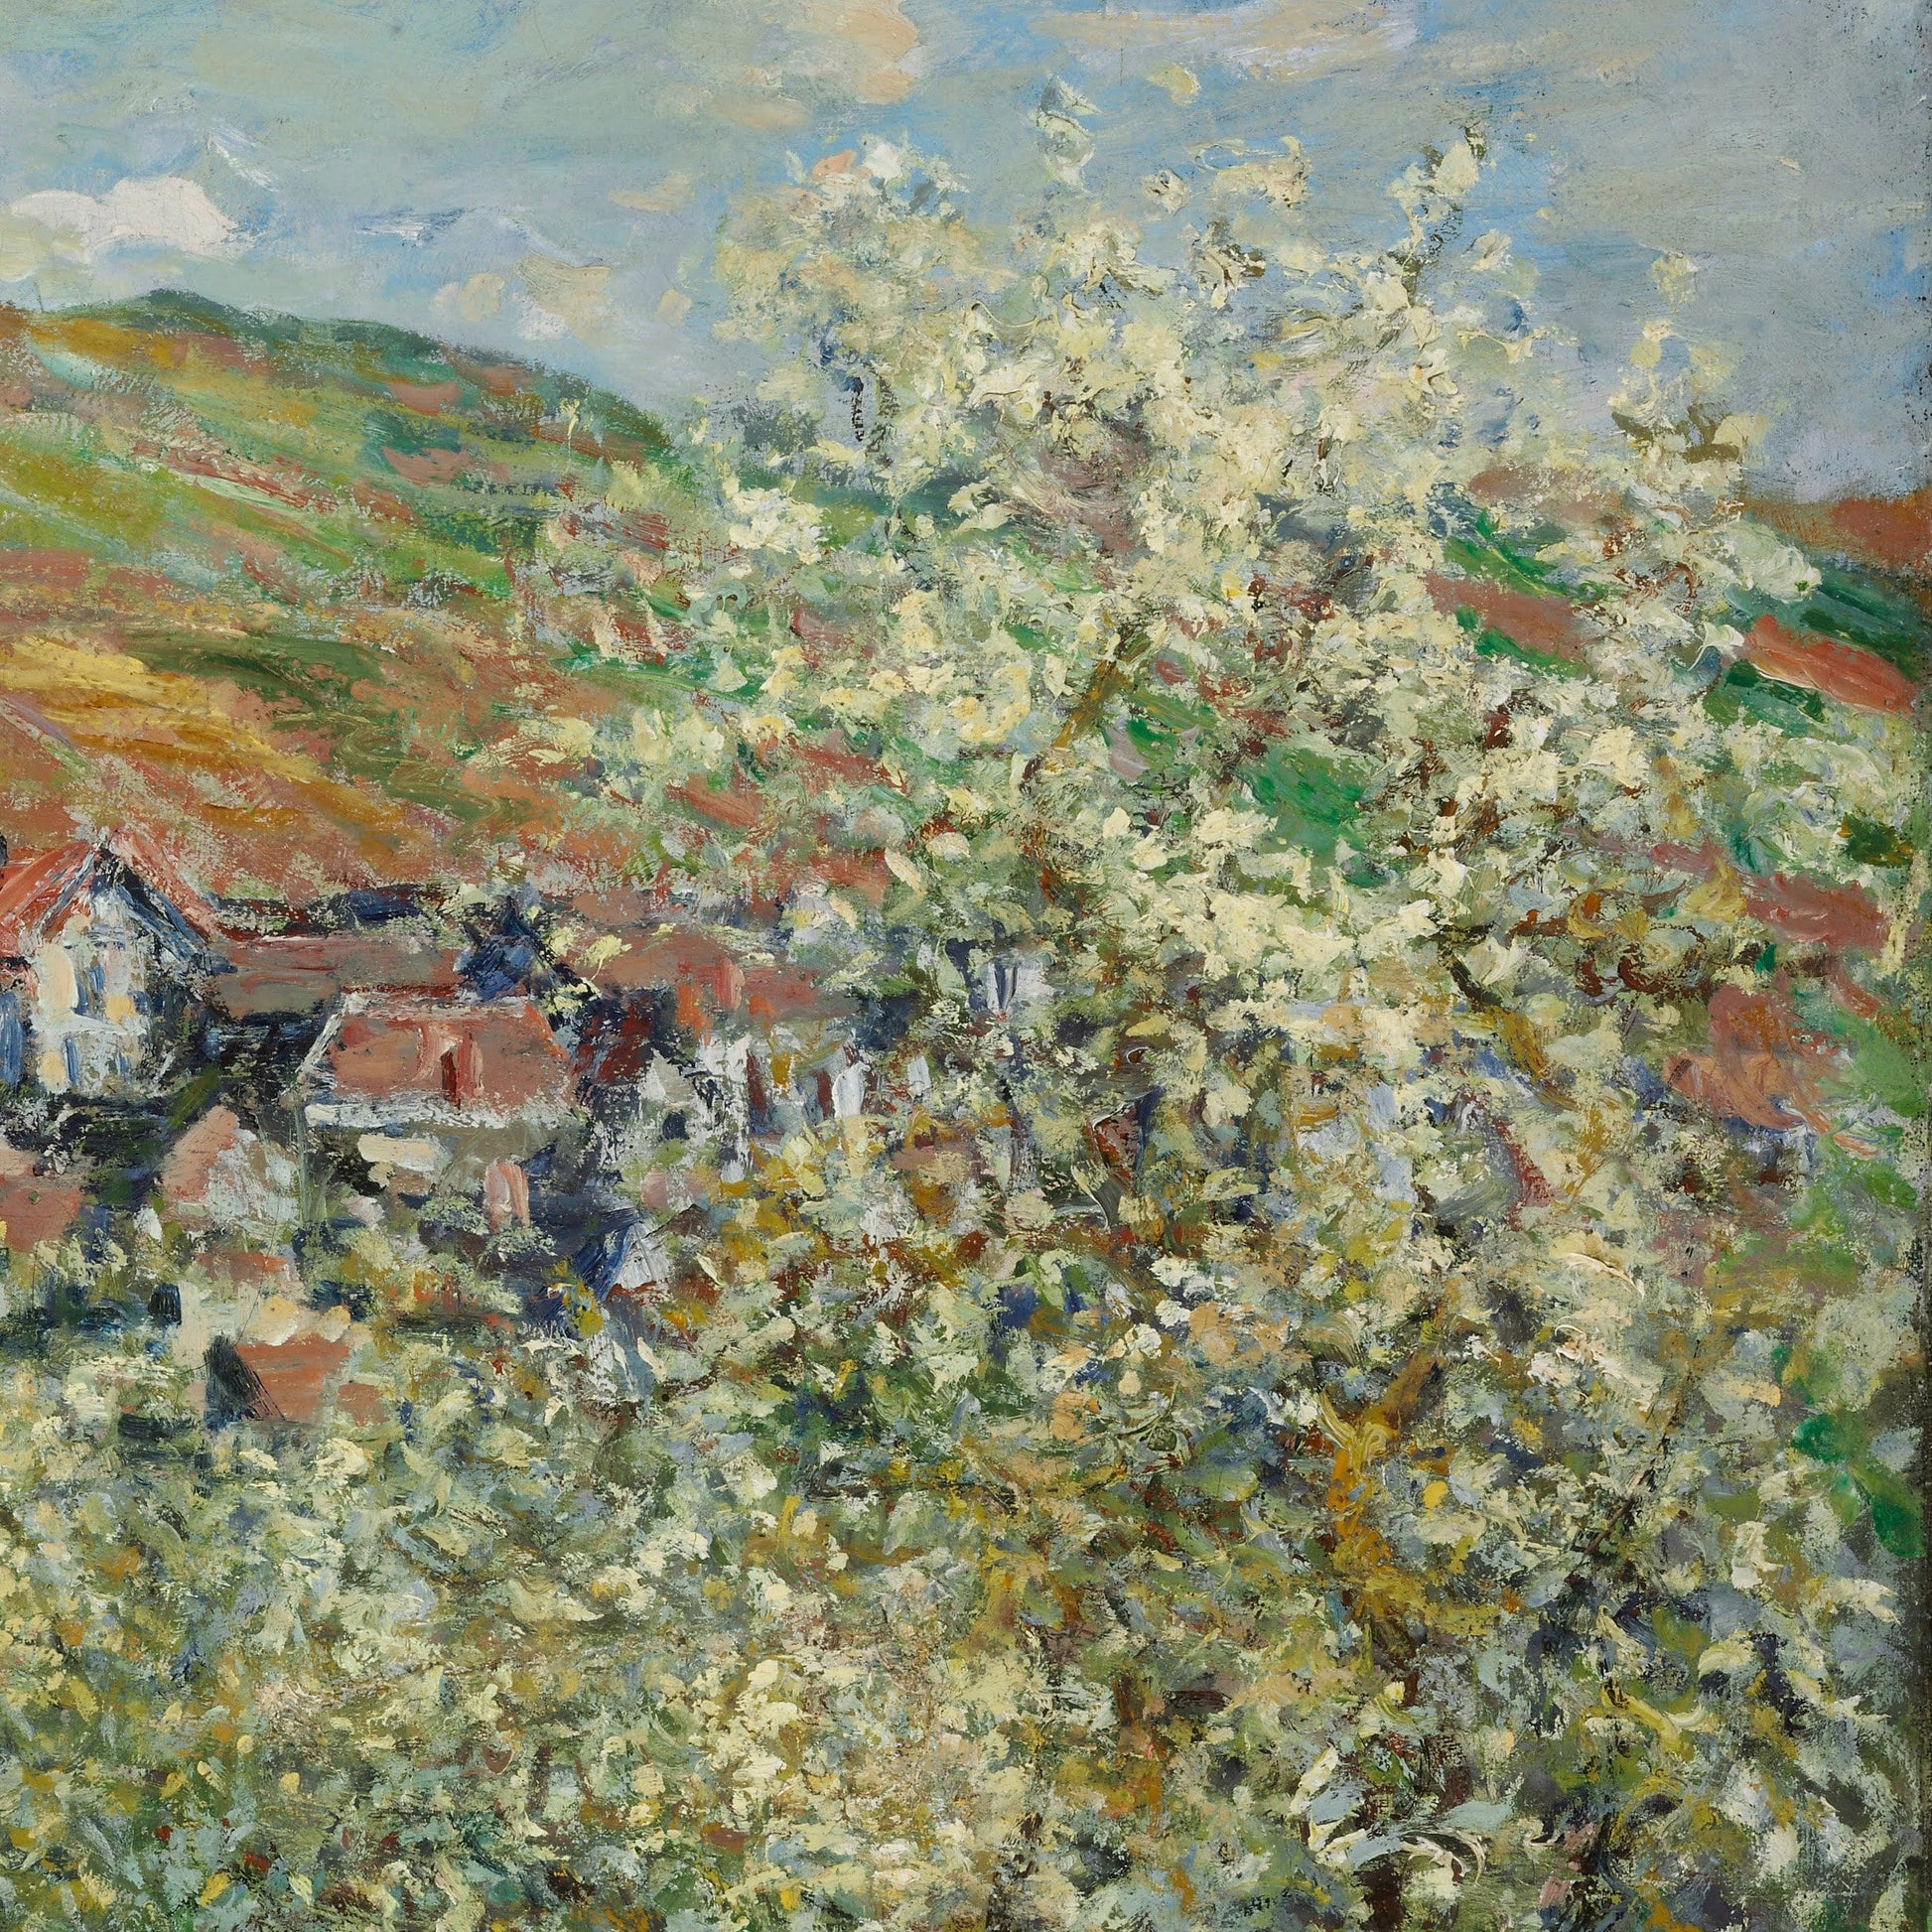 Plum Trees in Blossom by Claude Monet, 3d Printed with texture and brush strokes looks like original oil-painting, code:301